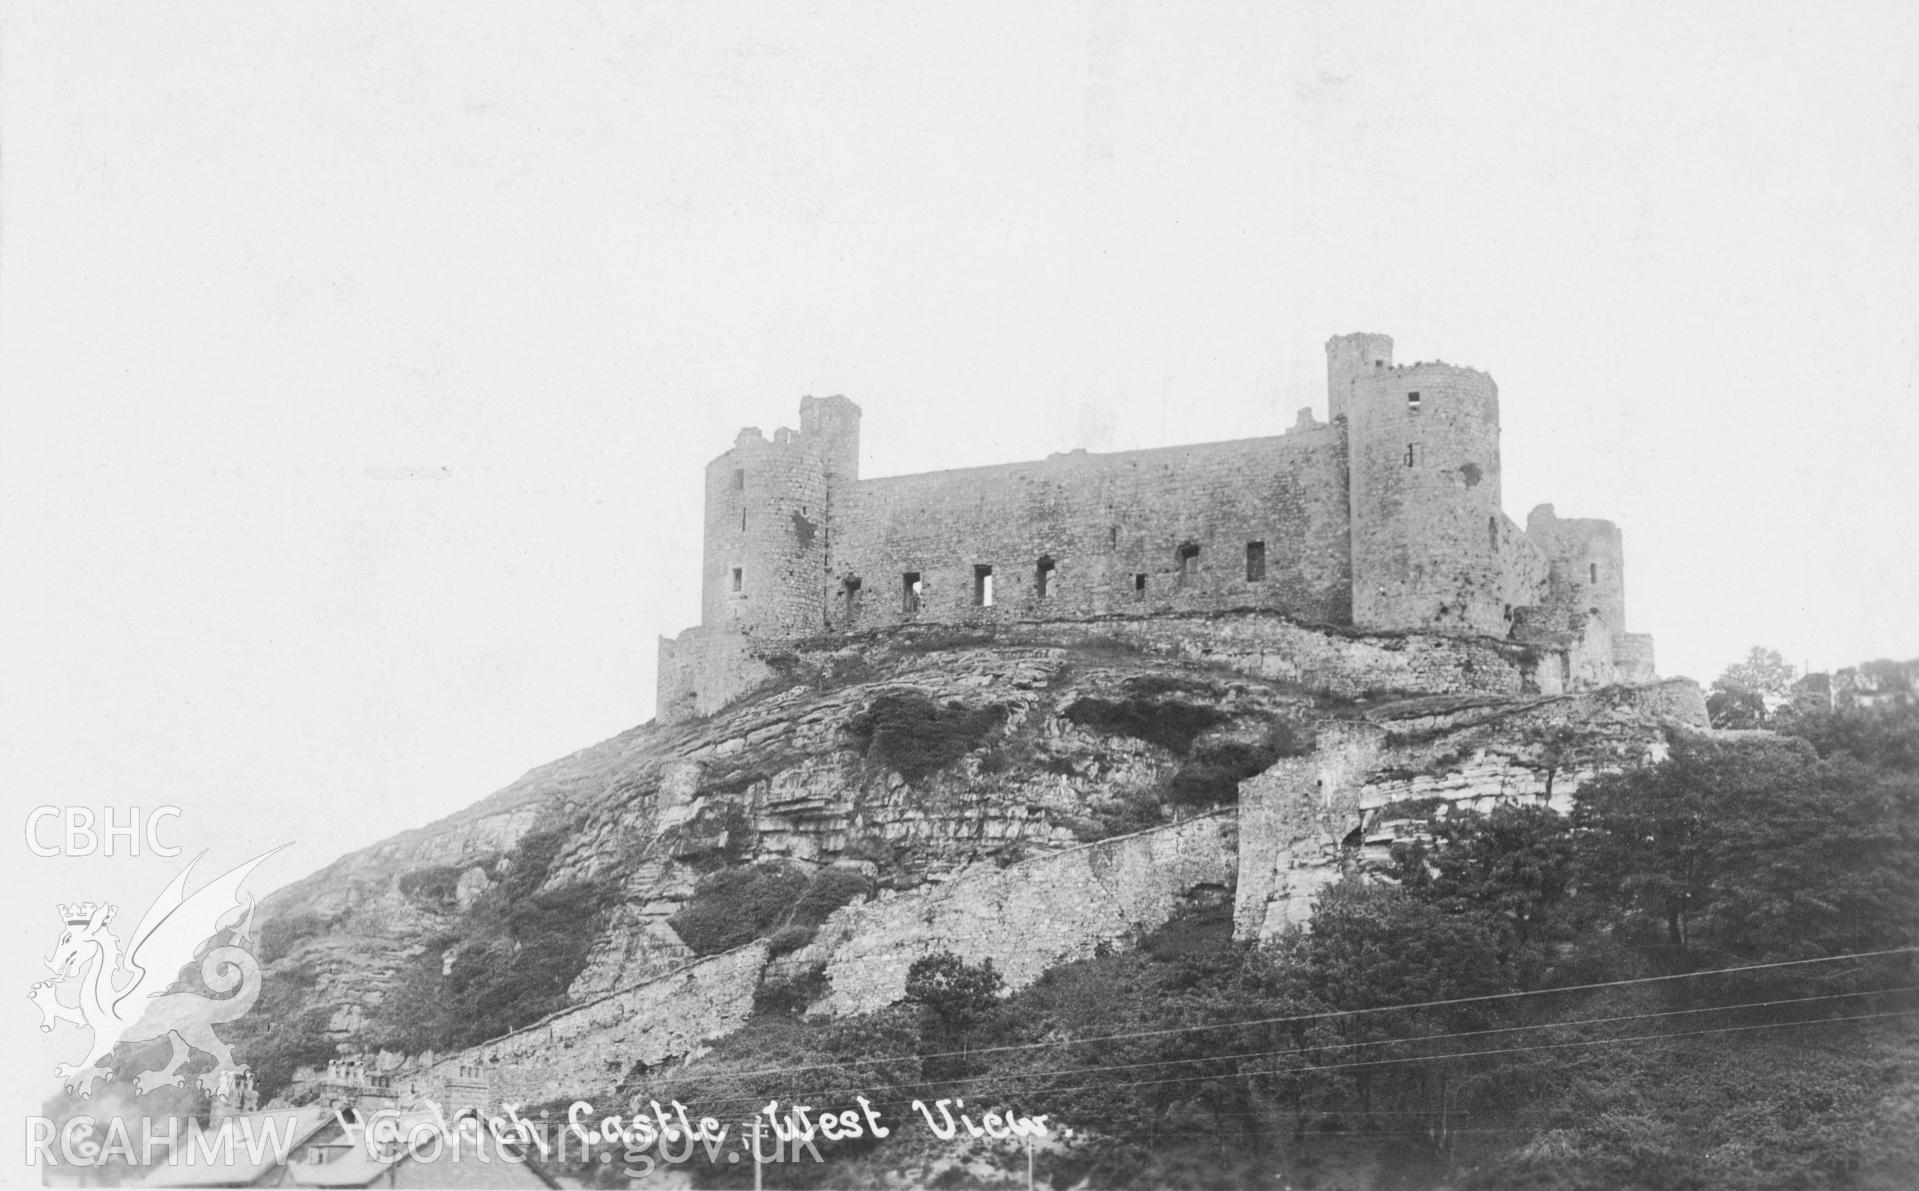 Digital copy of a black and white postcard relating to Harlech Castle: general view from west.